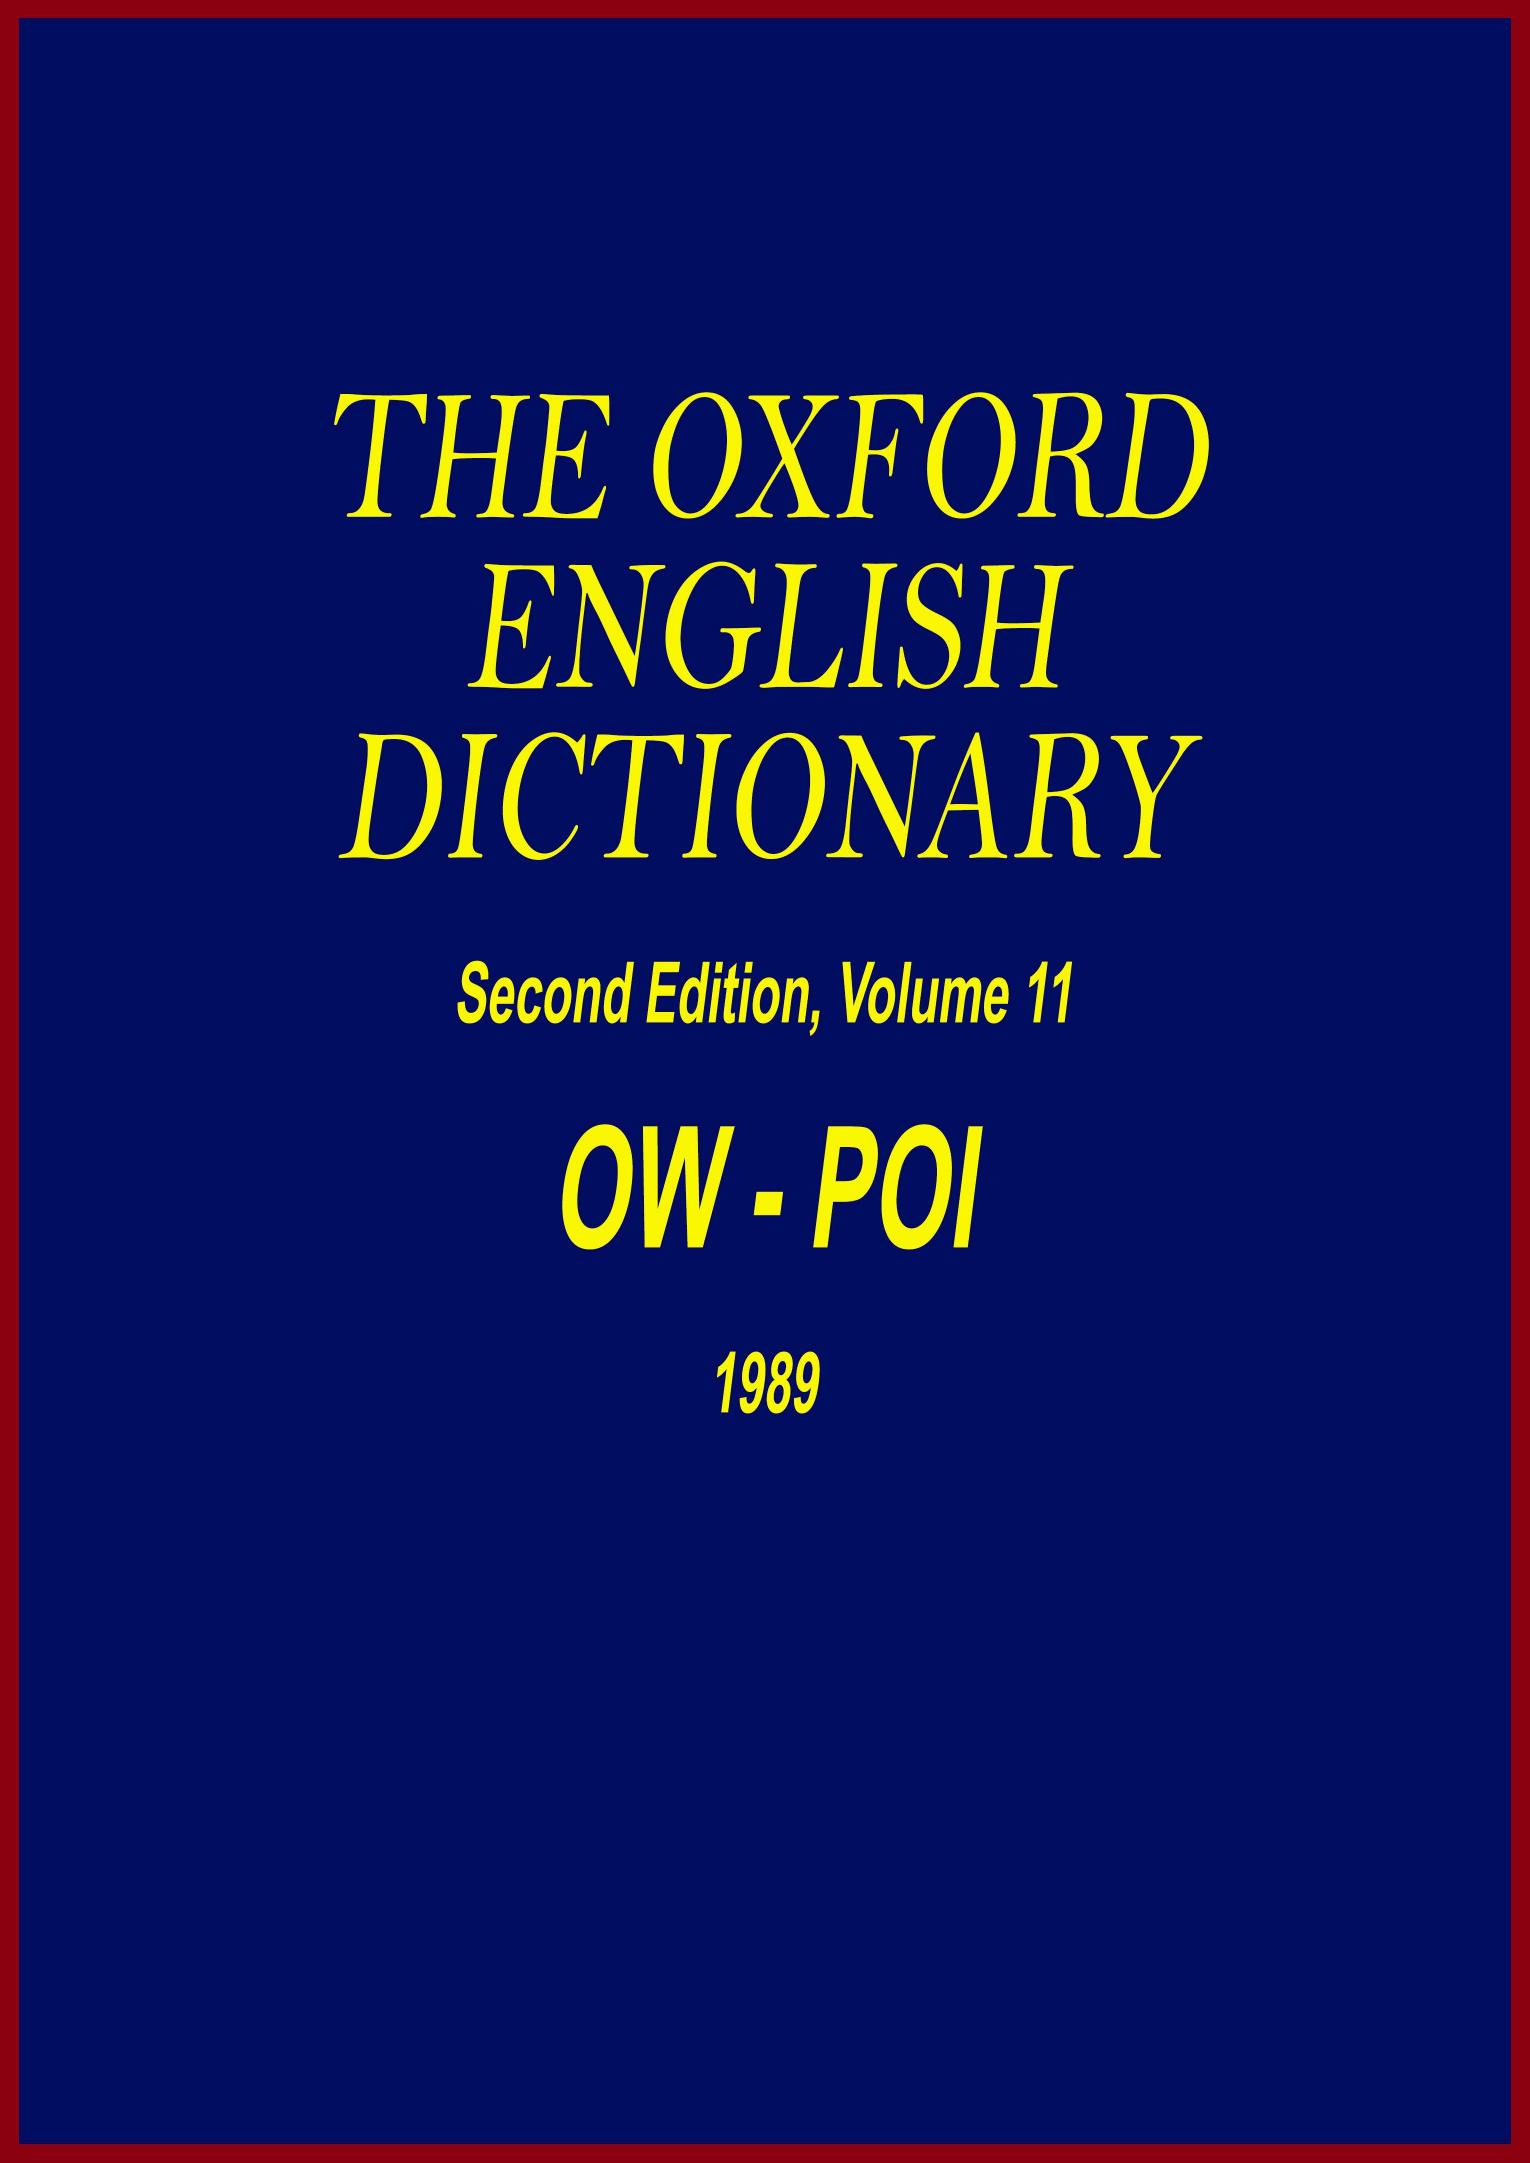 The Oxford English Dictionary - OW-POI